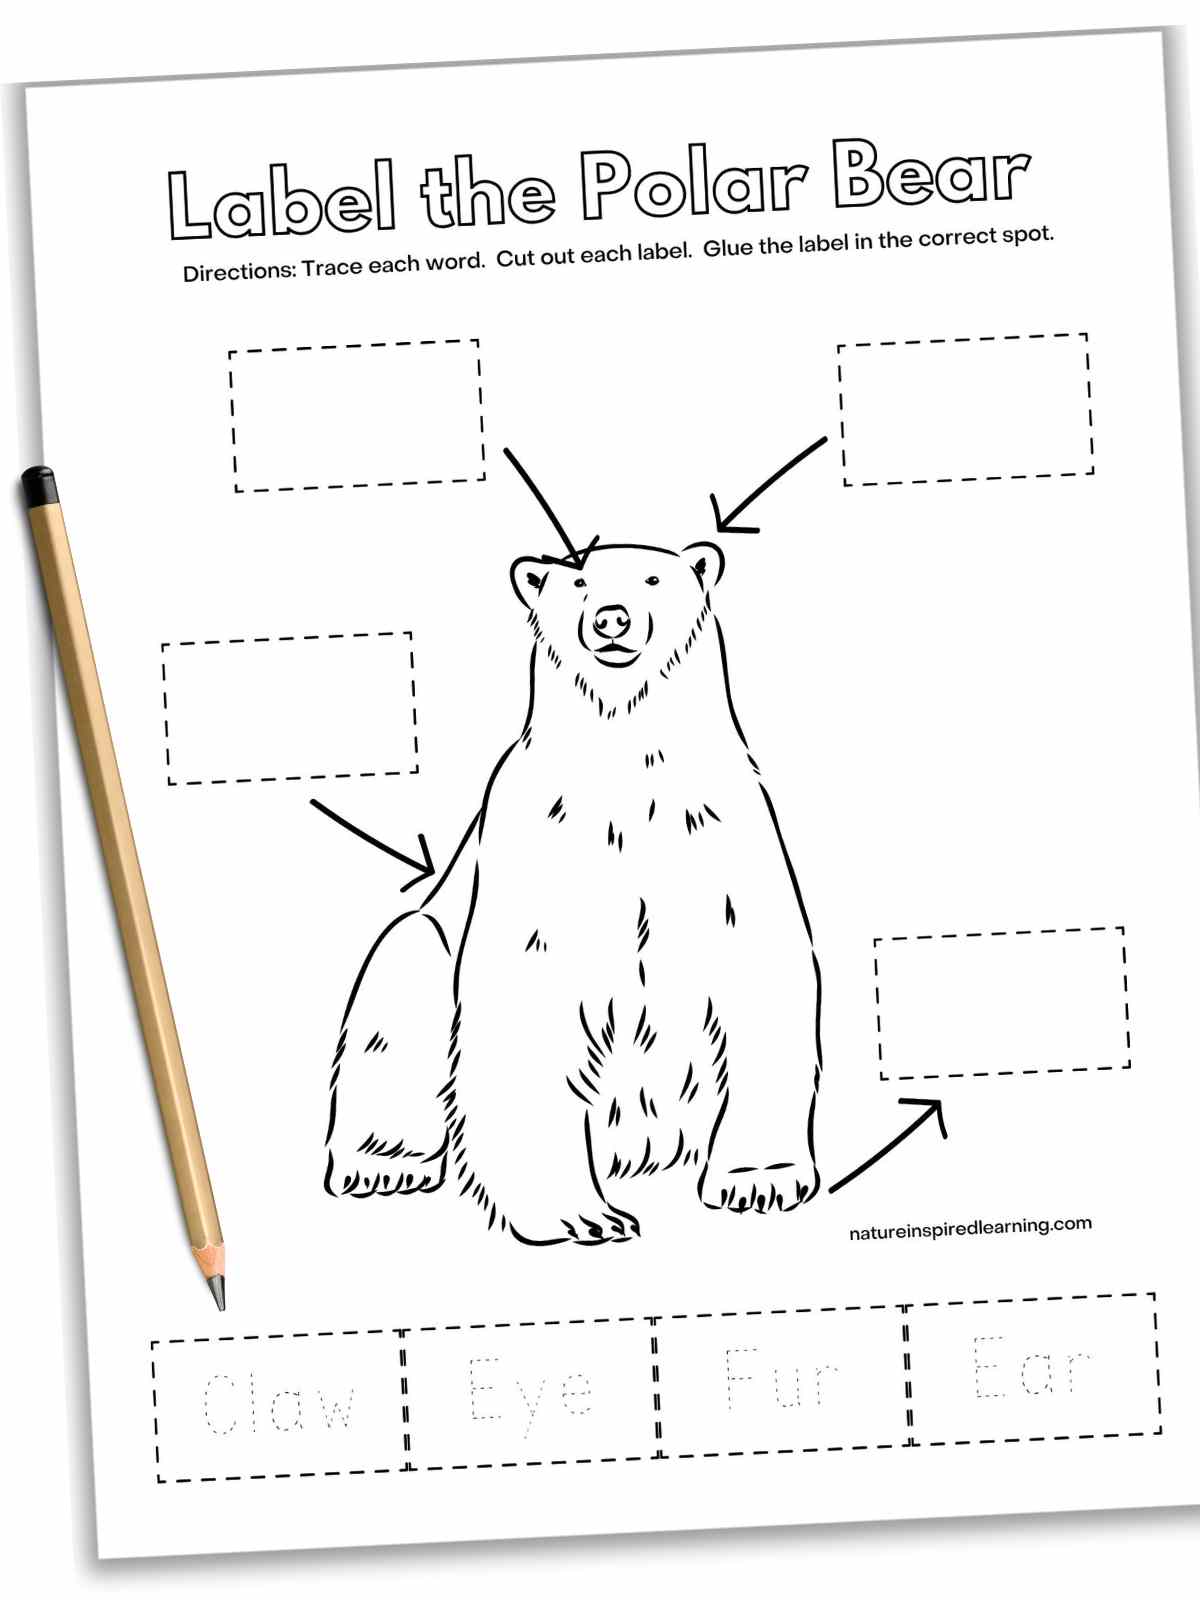 Black and white label the Polar bear worksheet with a large polar bear with dashed boxes with arrows above dashed rectangles with traceable labels. A pencil on top of the worksheet on the left side.